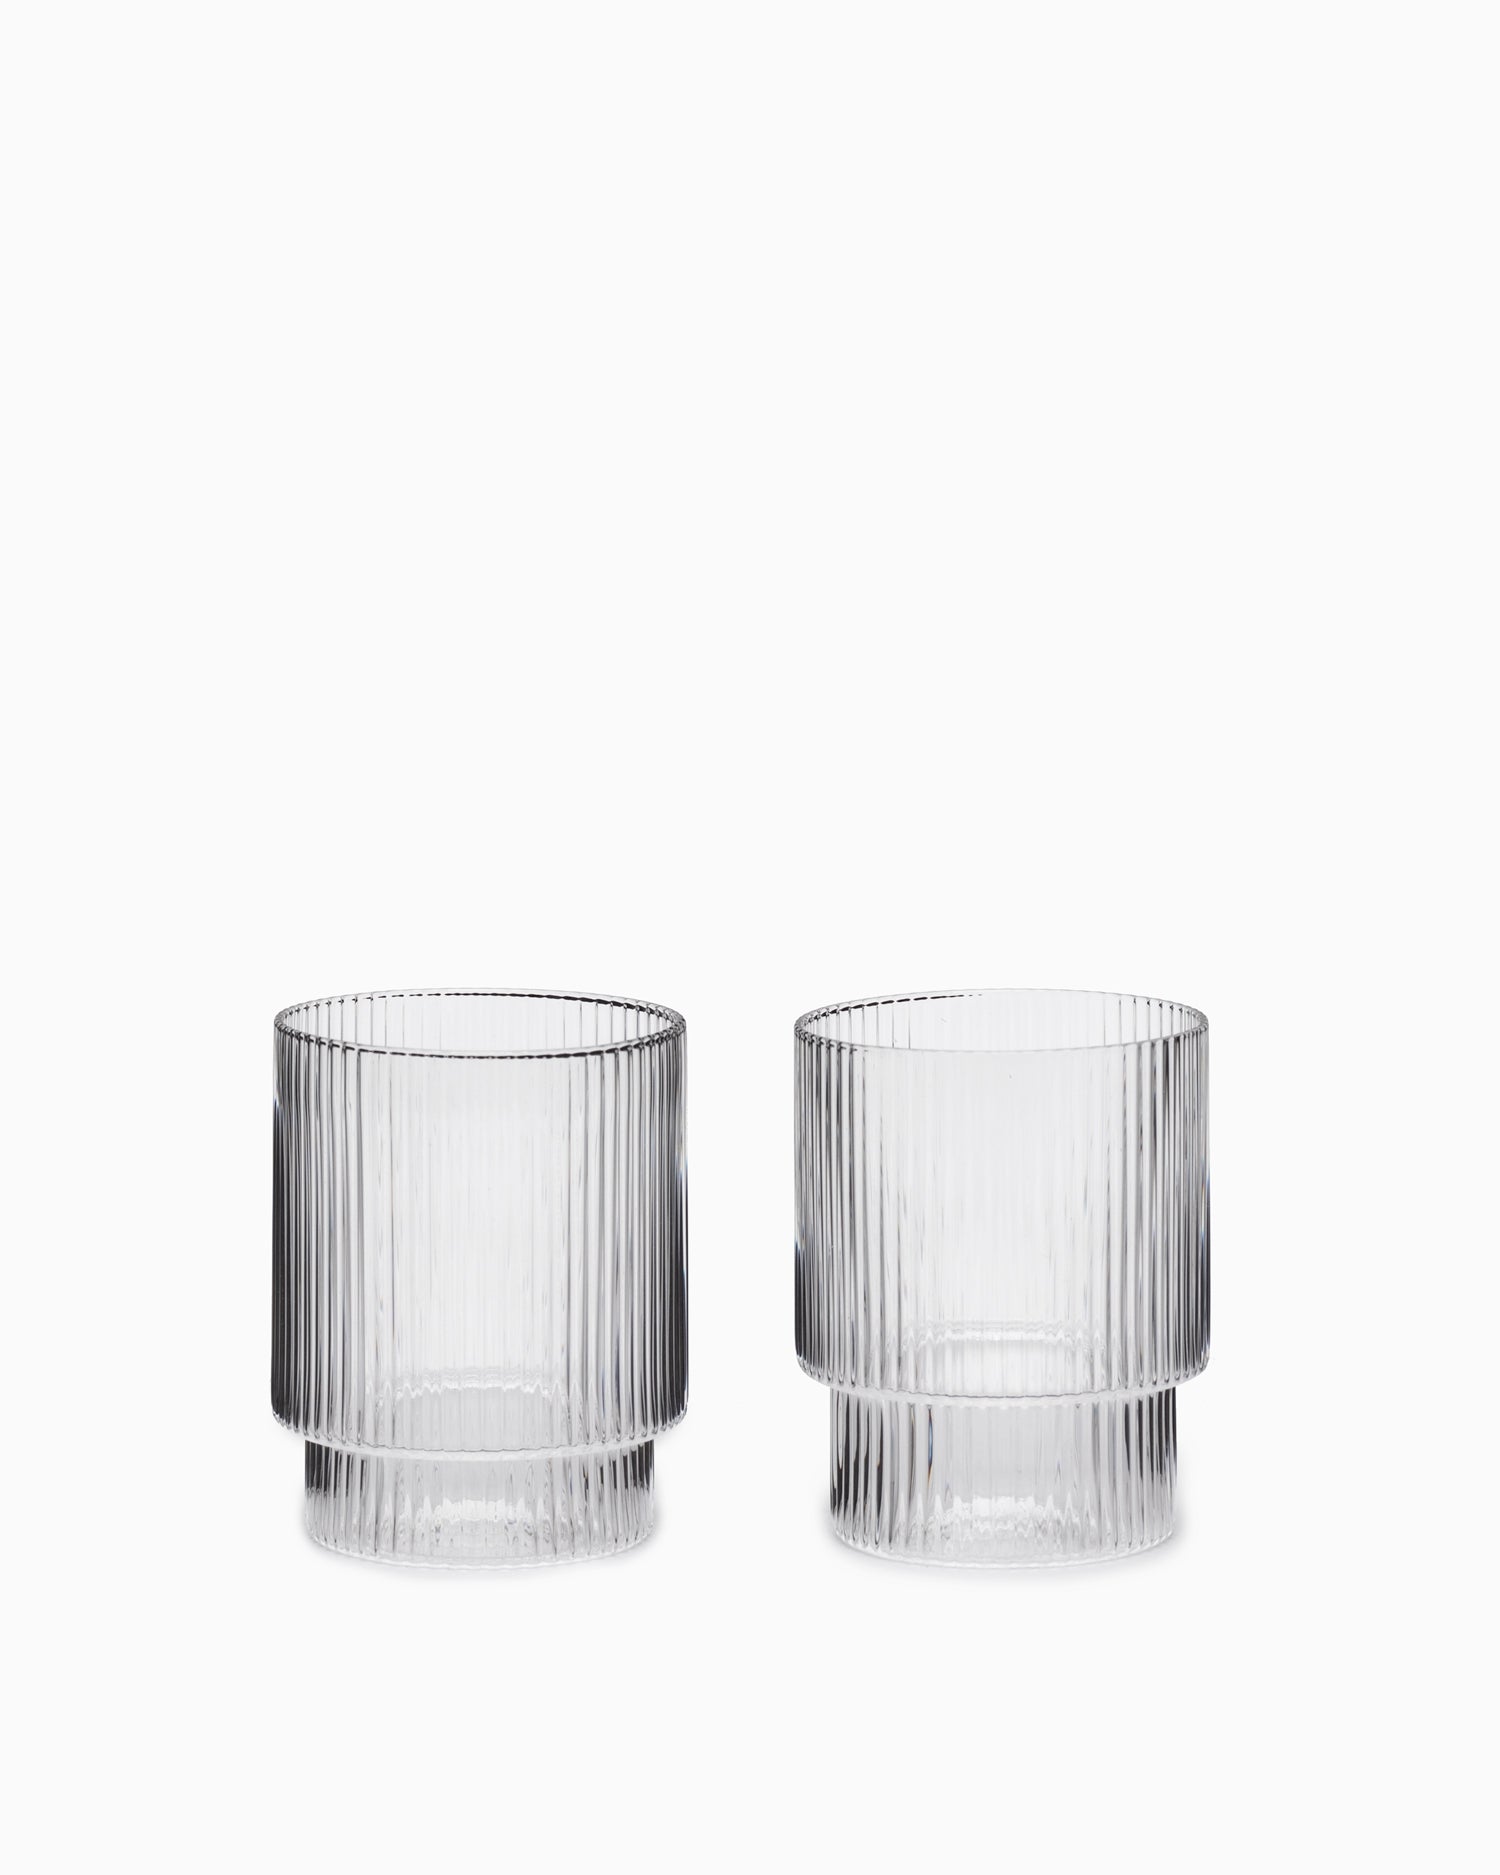 Ripple Glasses Set of 4 - Clear